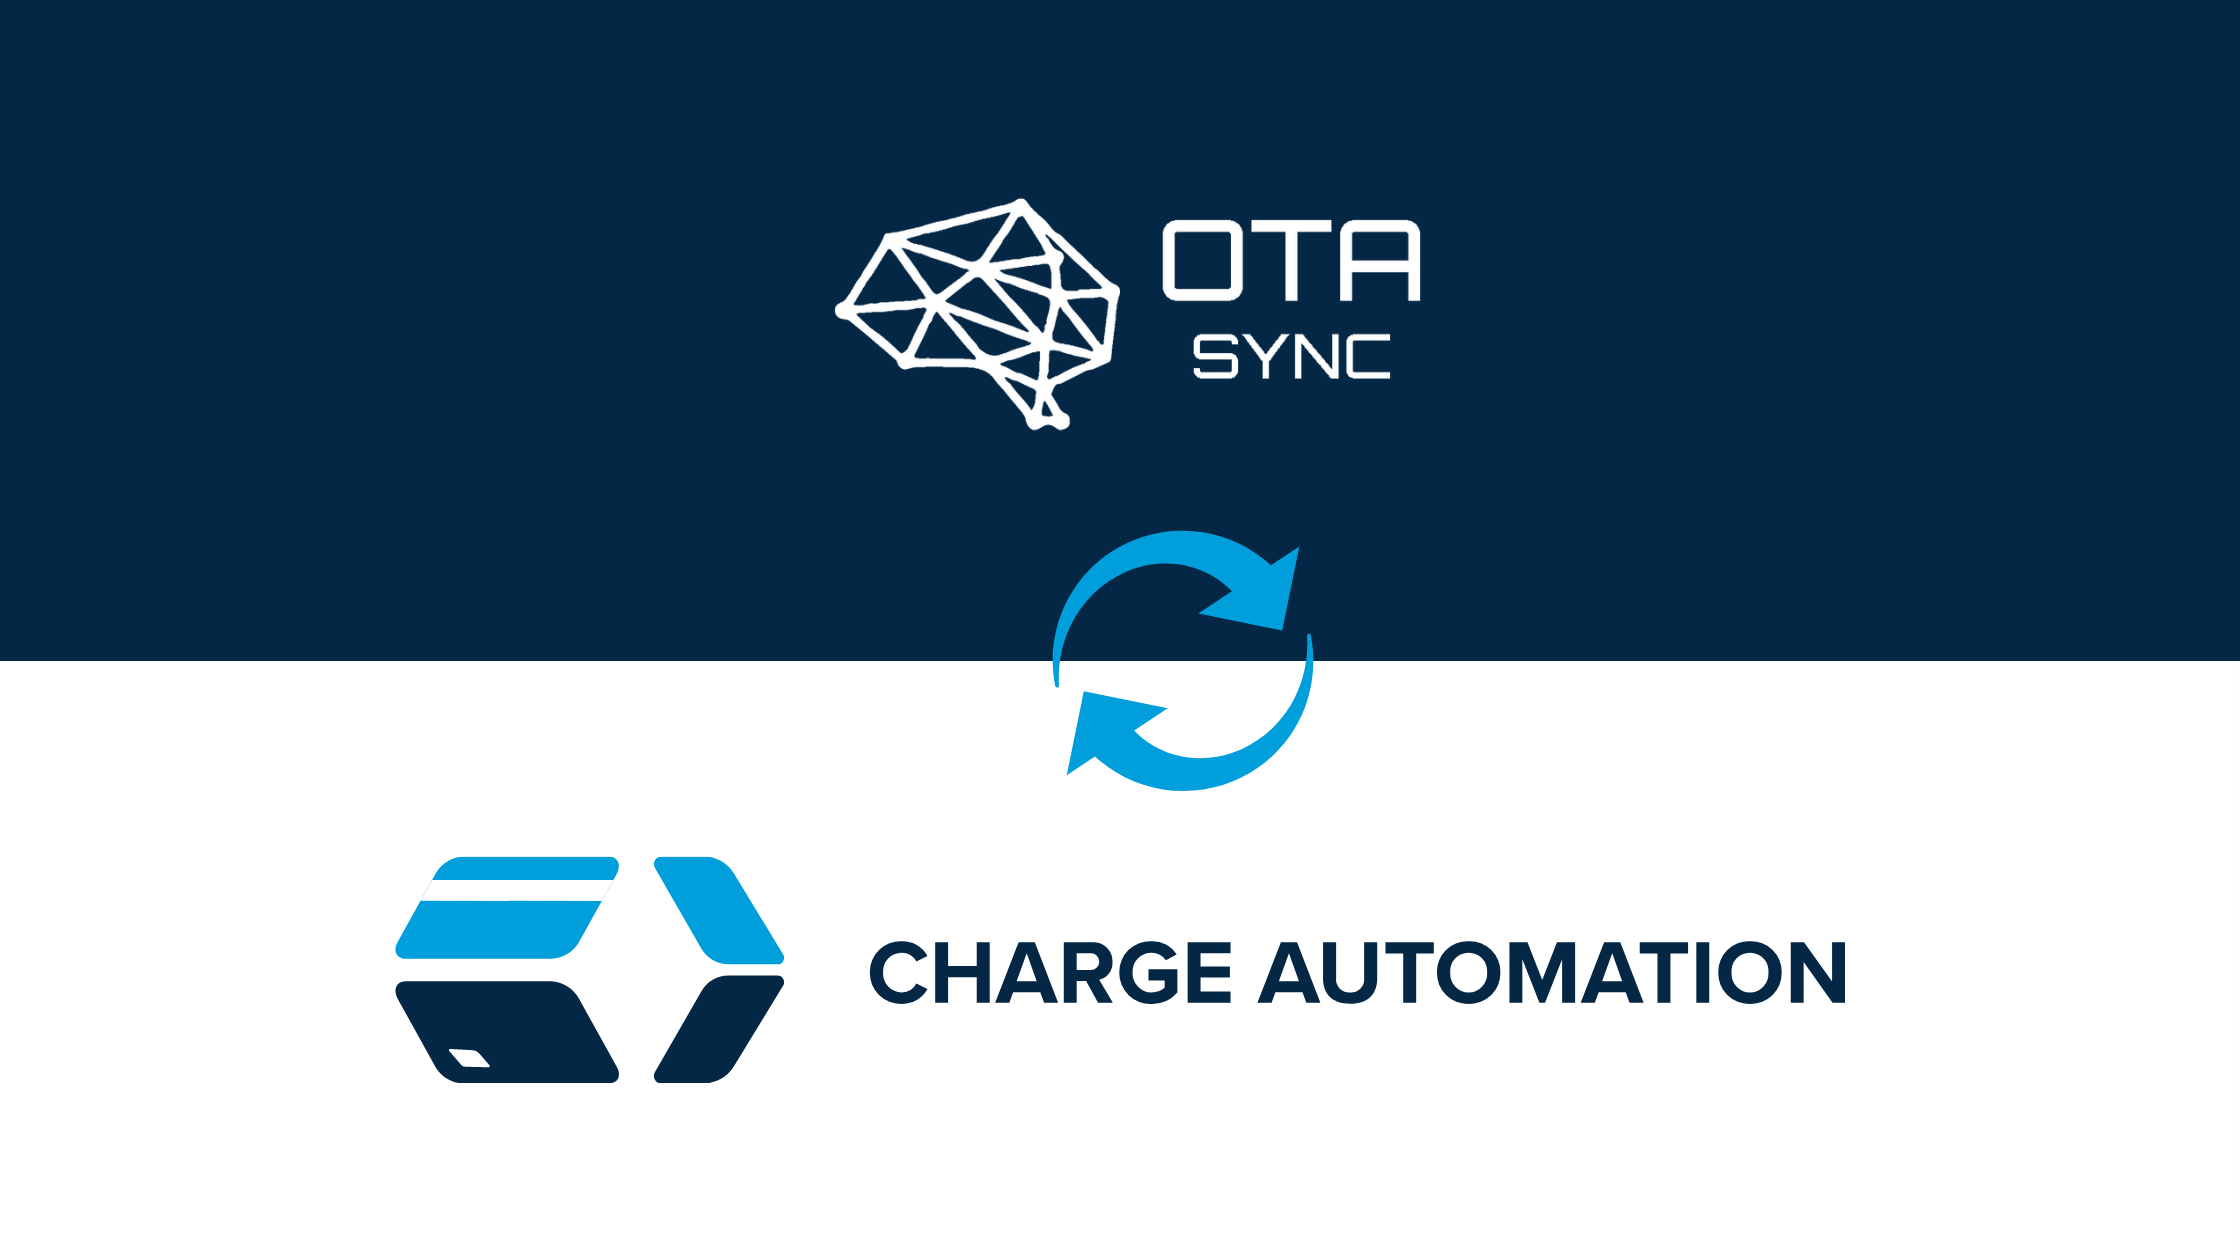 OTA Sync: Connection with Charge Automation